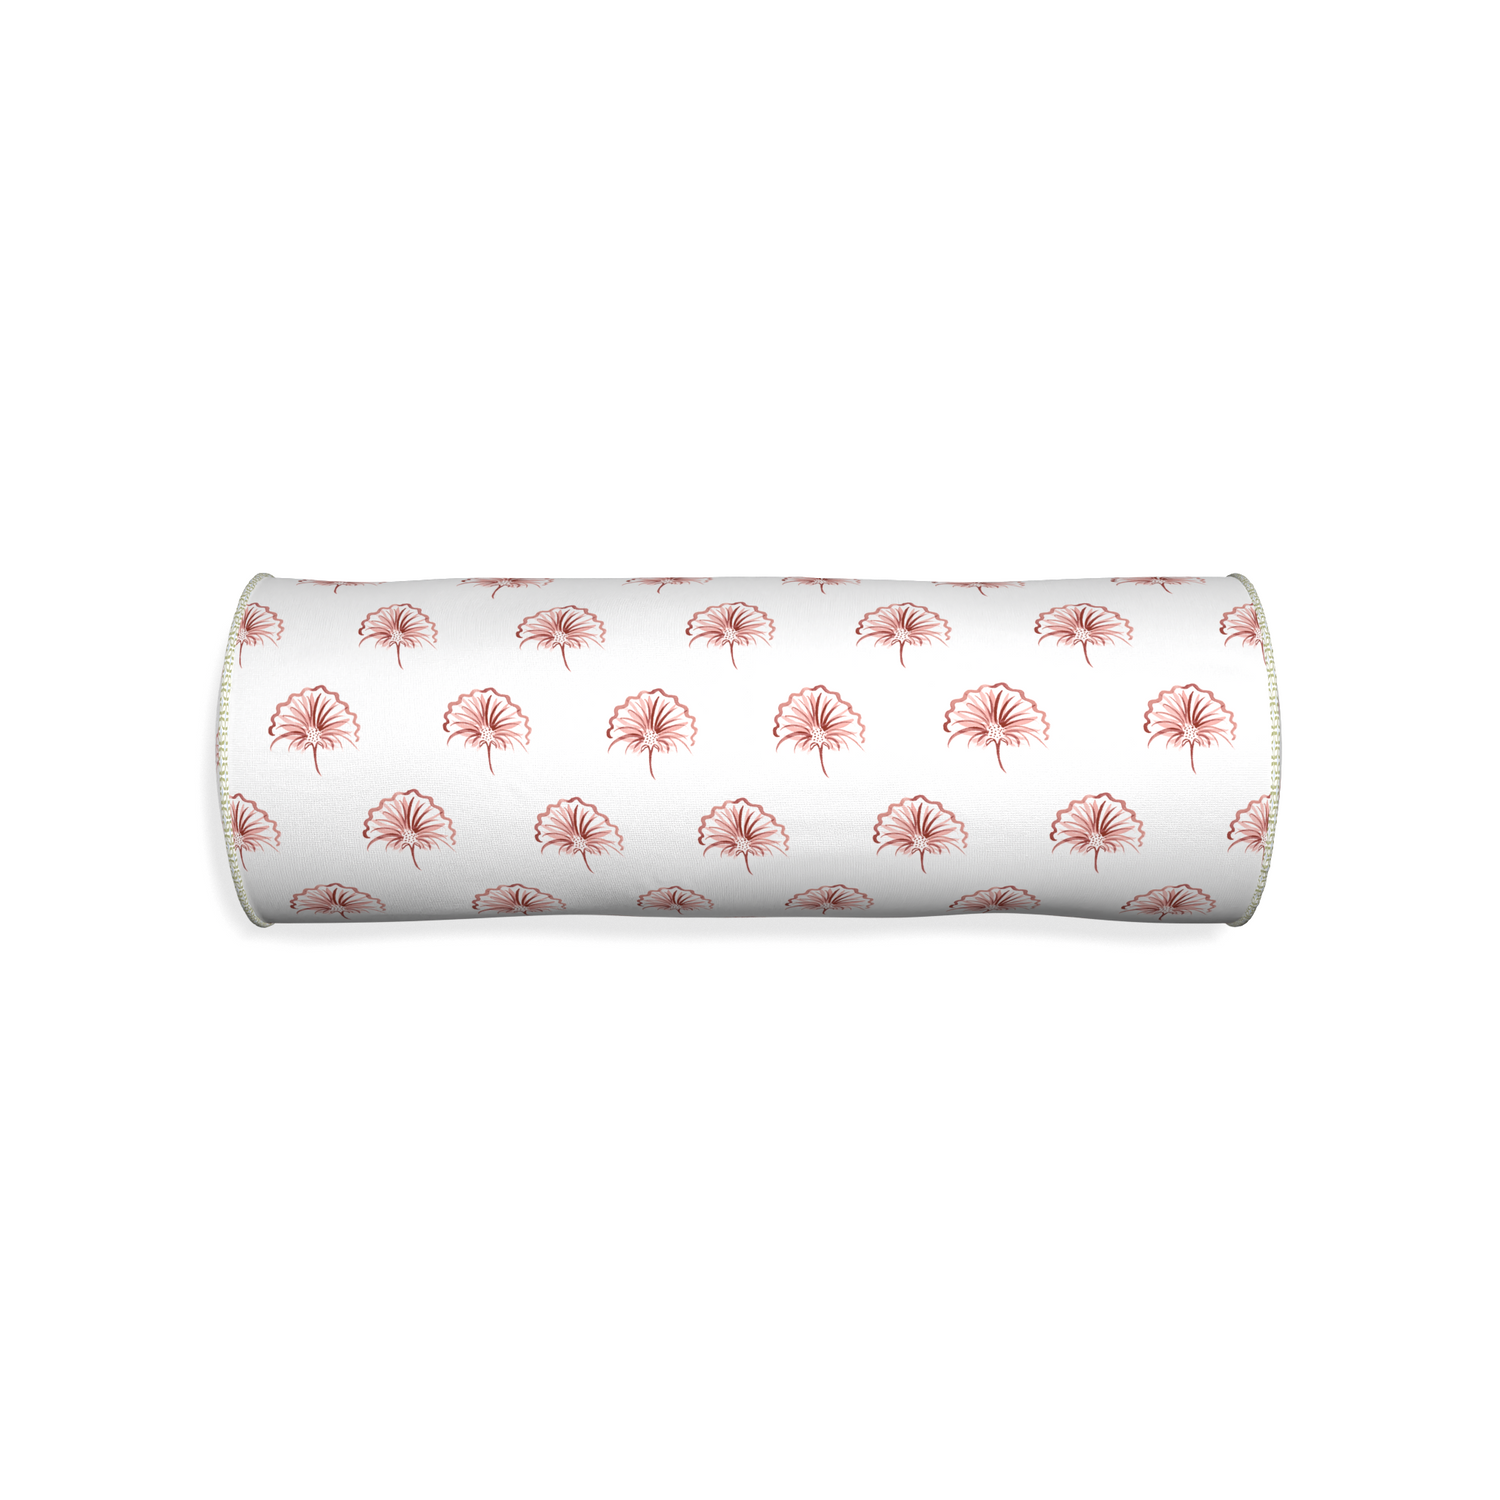 Bolster penelope rose custom floral pinkpillow with l piping on white background